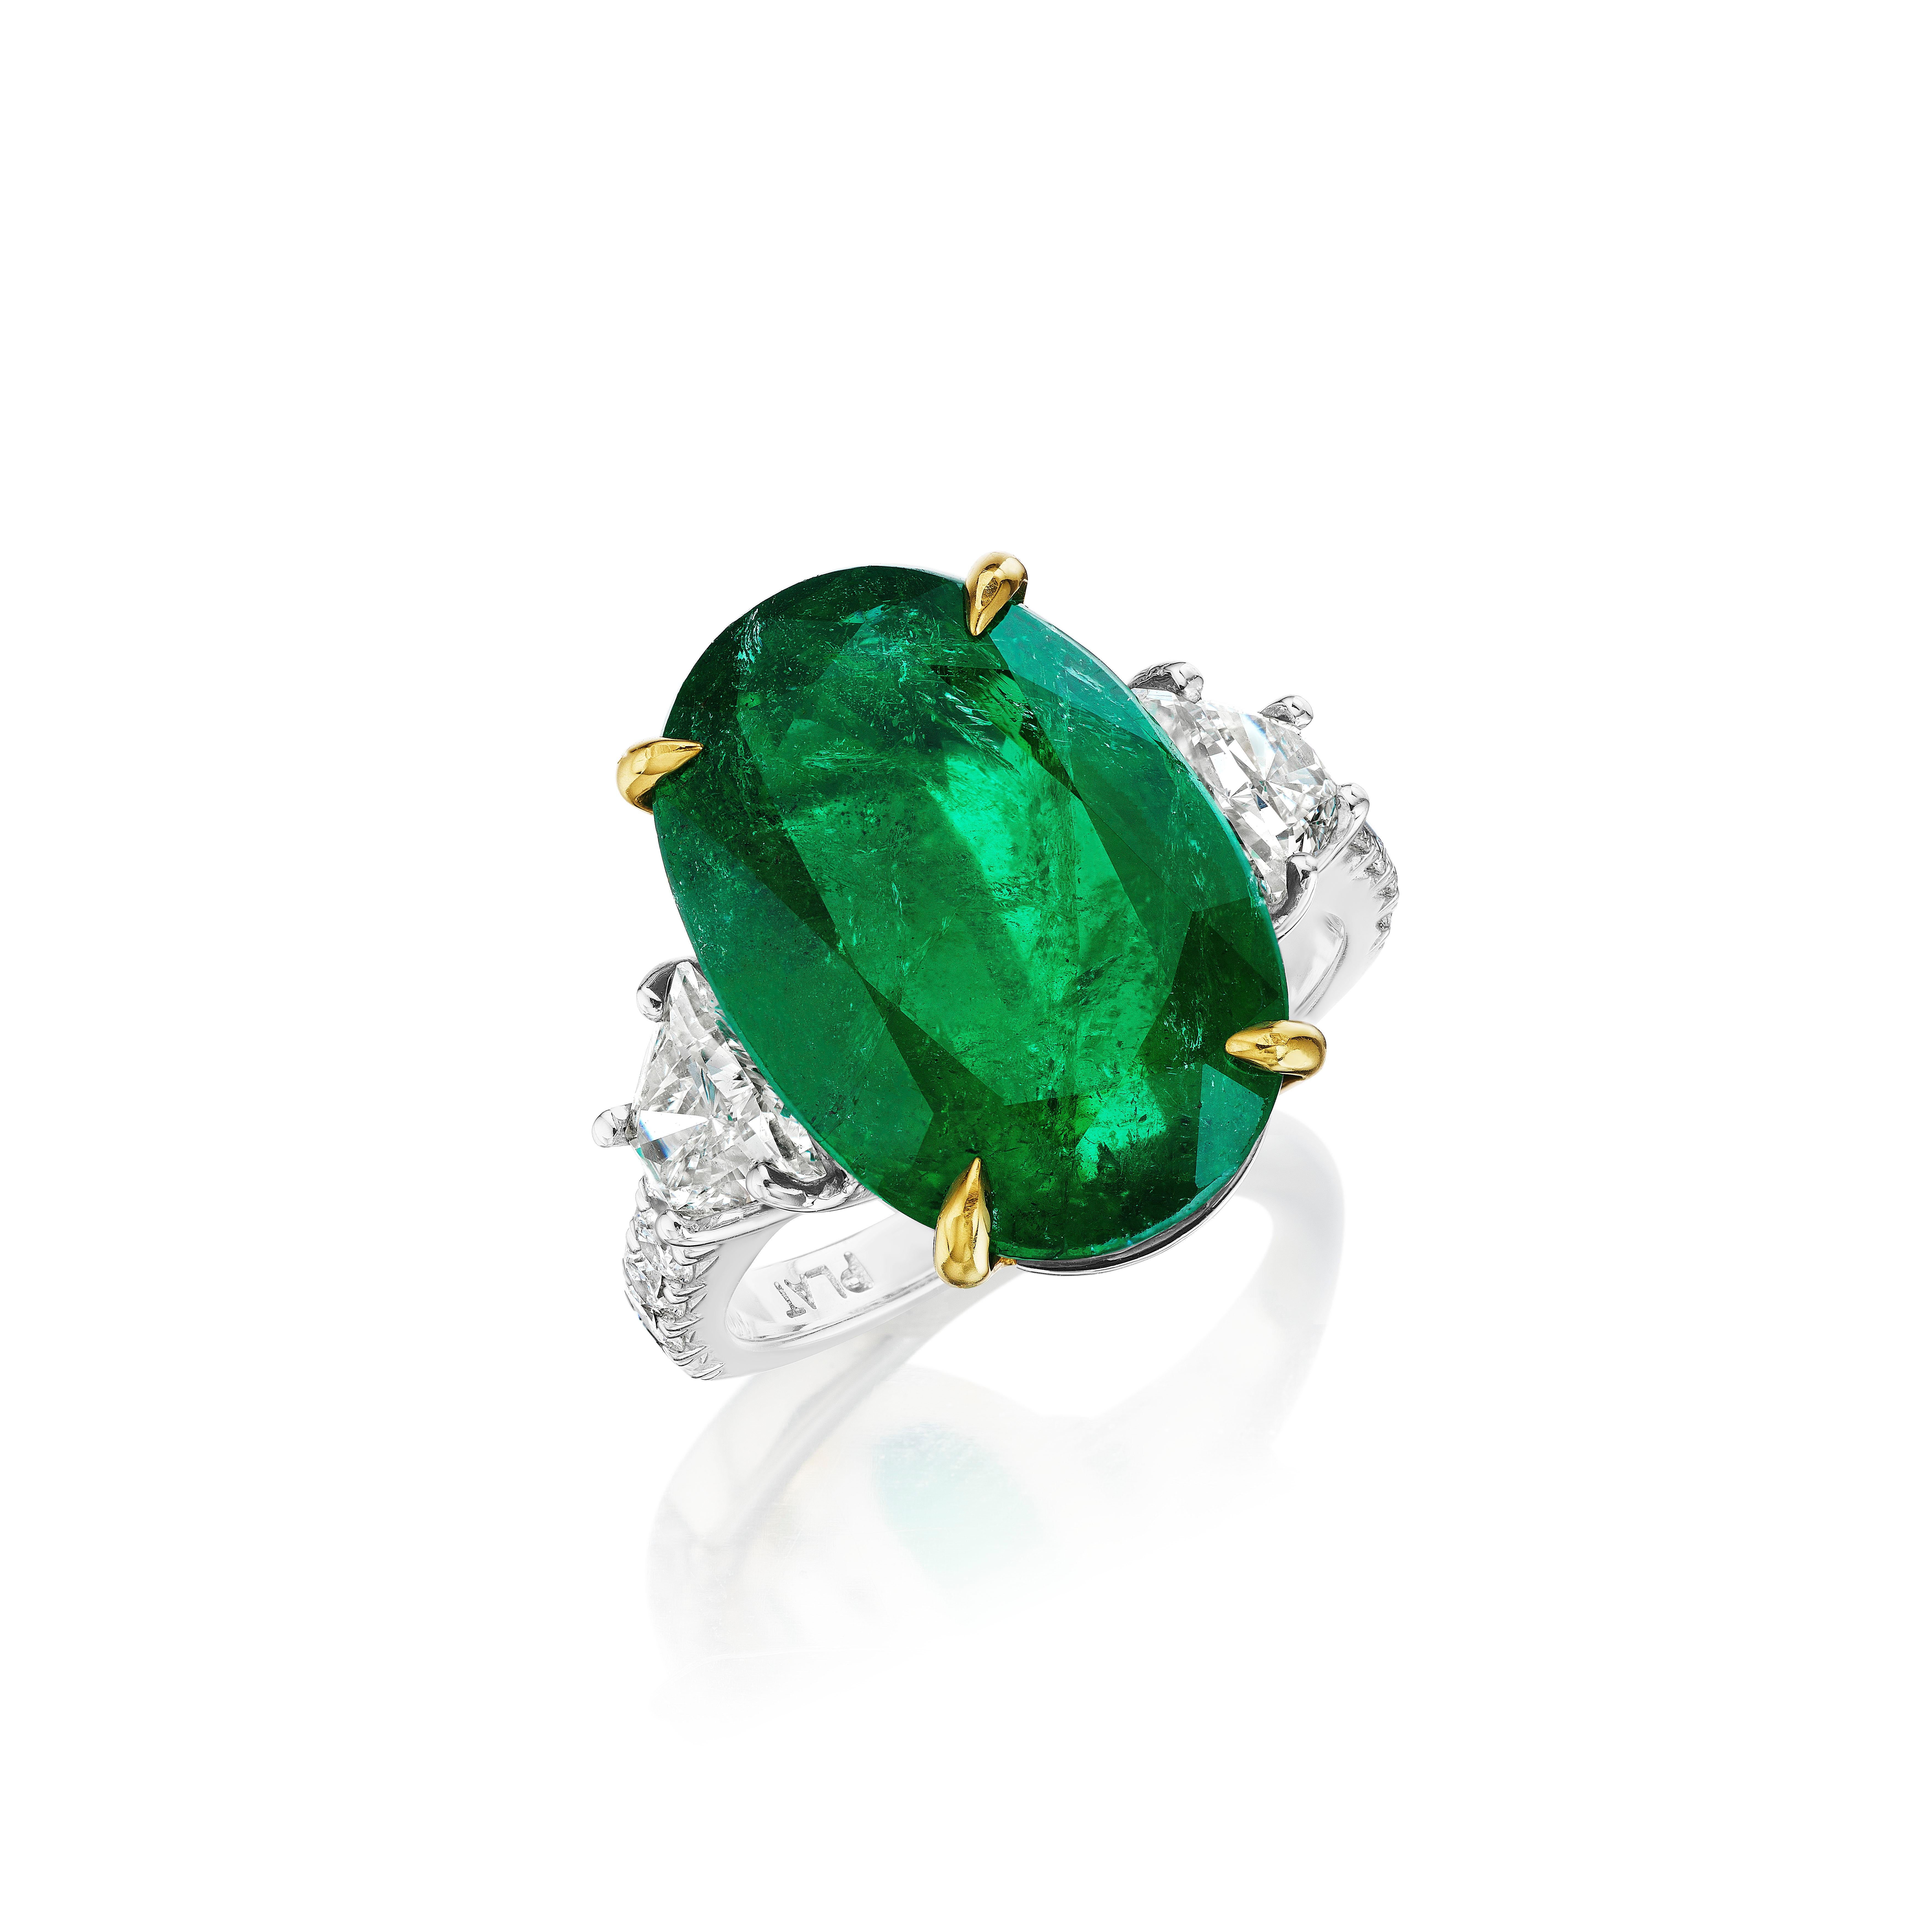 •	Platinum & 18KT Two Tone
•	Size 6.5
•	9.68 Carats

•	Number of Oval Emeralds: 1
•	Carat Weight: 8.54ctw
•	16.80 x 11.70mm

•	Number of Brilliant Trapezoid Diamonds: 2
•	Carat Weight: 0.64ctw

•	Number of Round Diamonds: 10
•	Carat Weight: